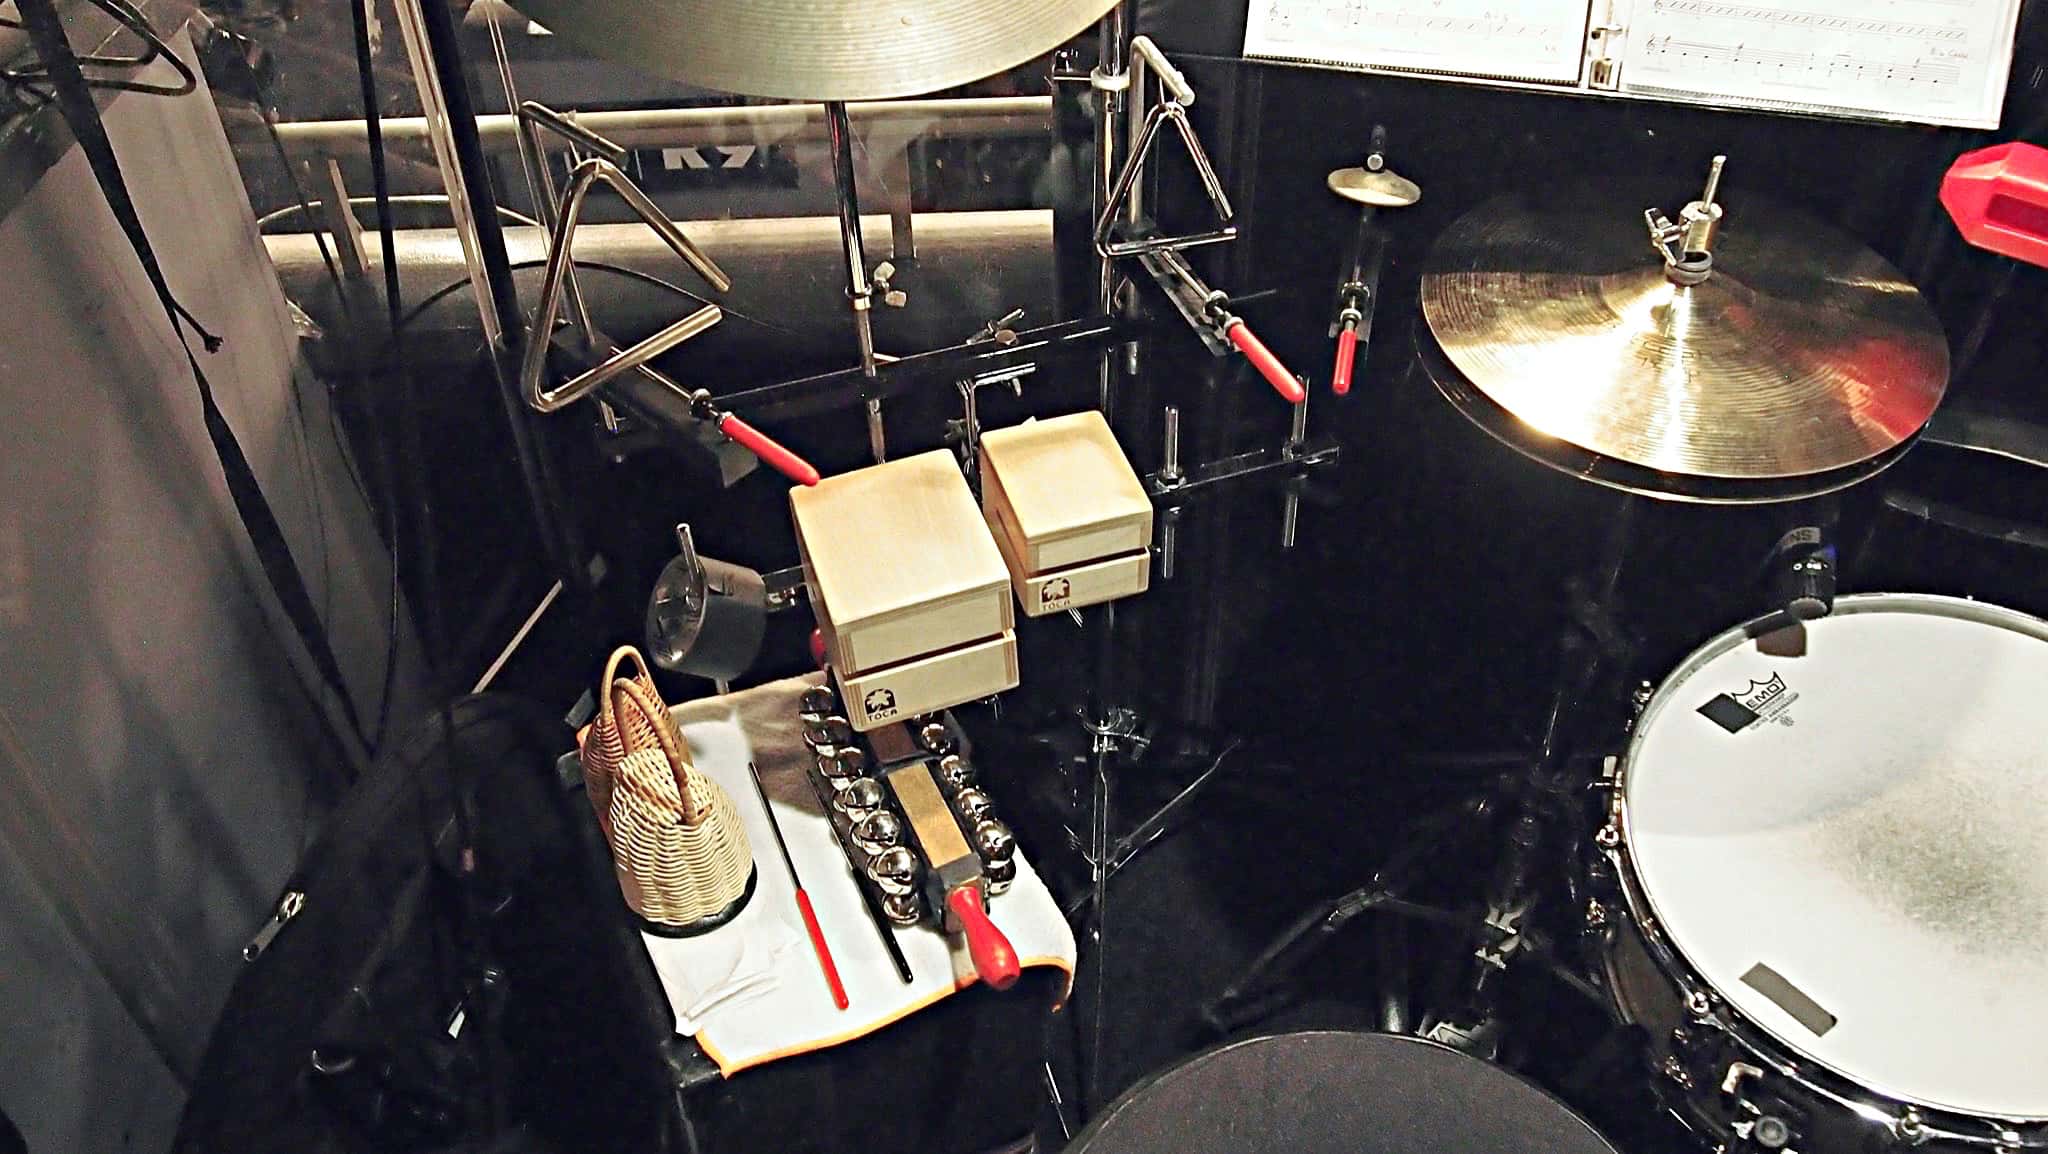 Greg Landes' drum set setup for the Madison Square Garden production of Dr Seuss' How the Grinch Stole Christmas.